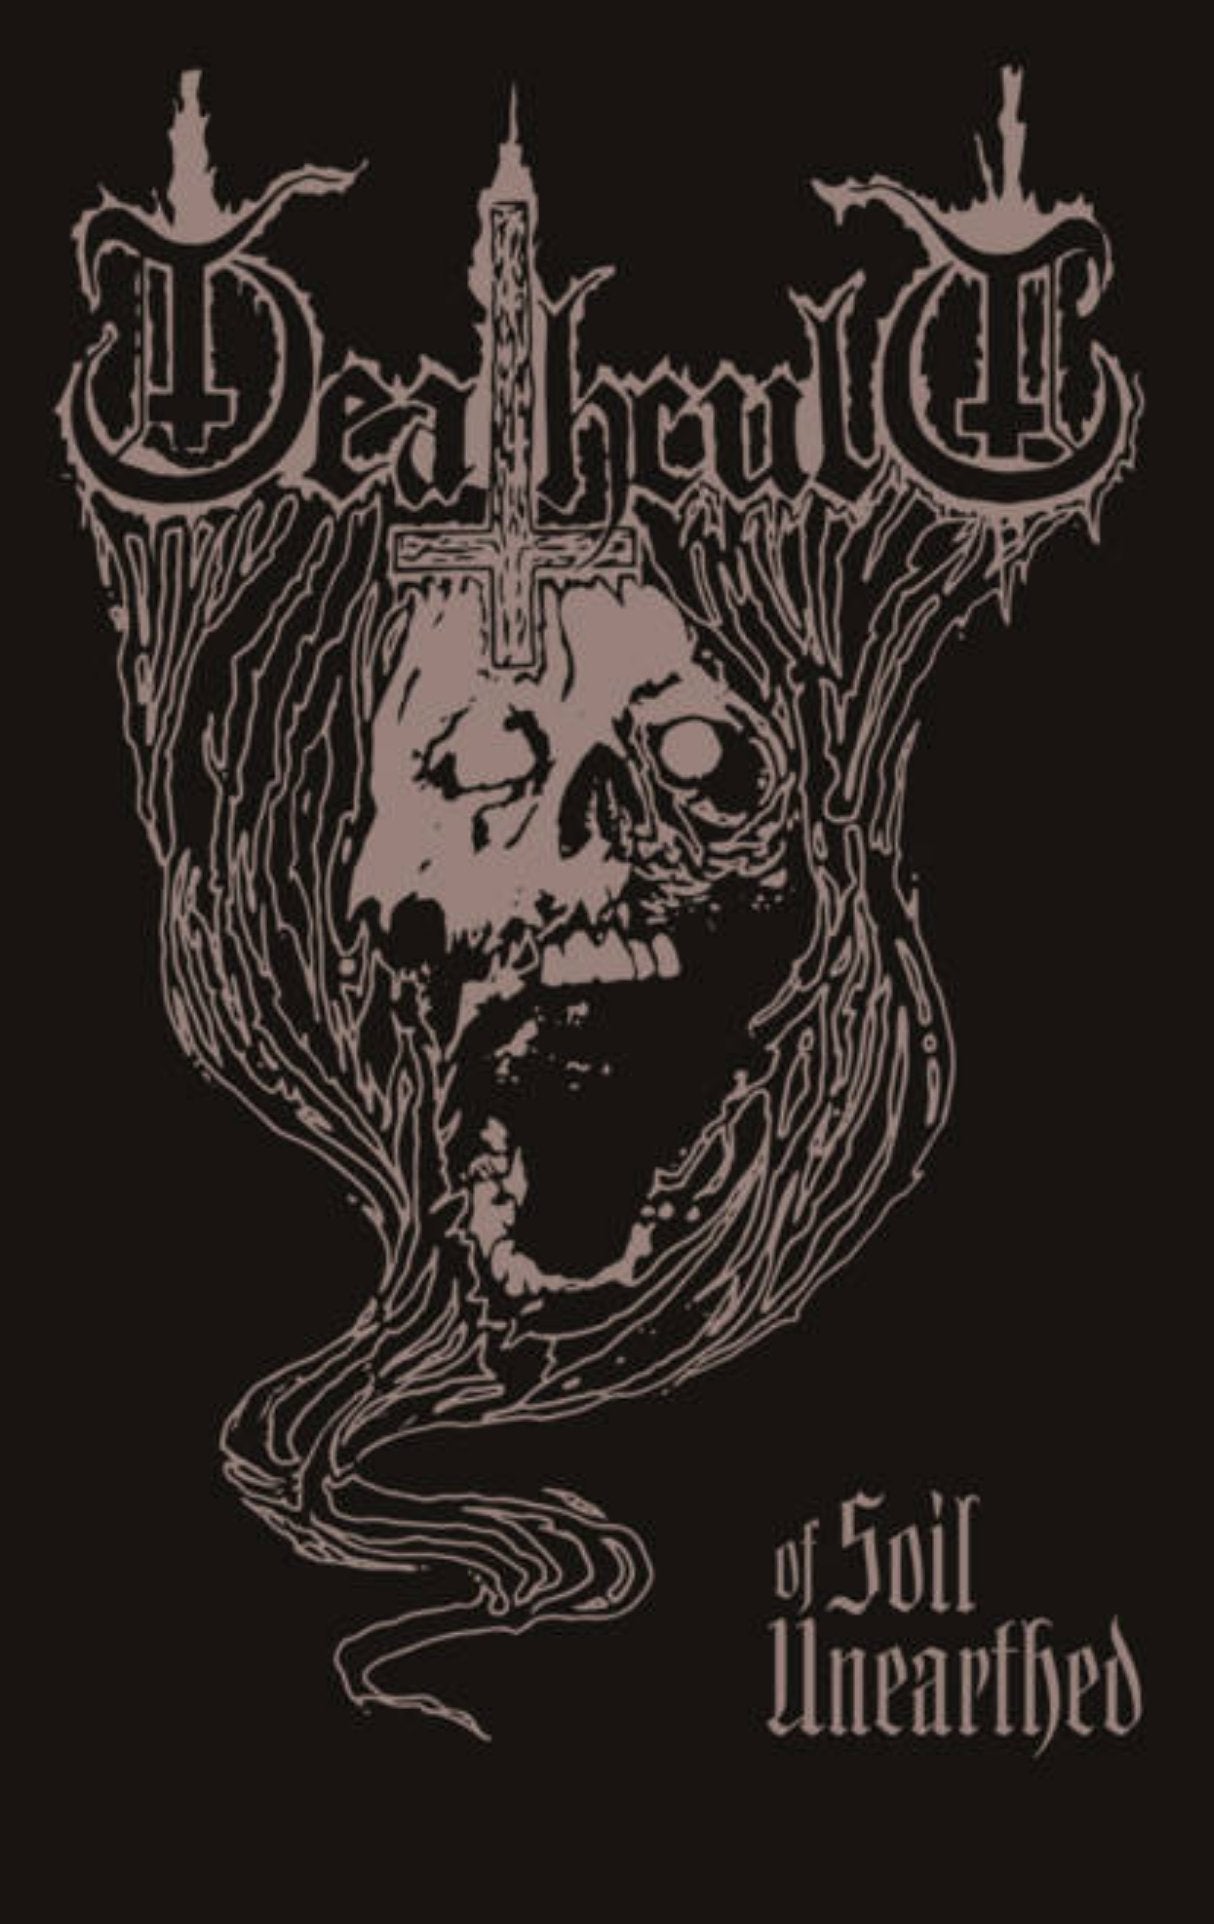 Deathcult - Of Soil Unearthed MC